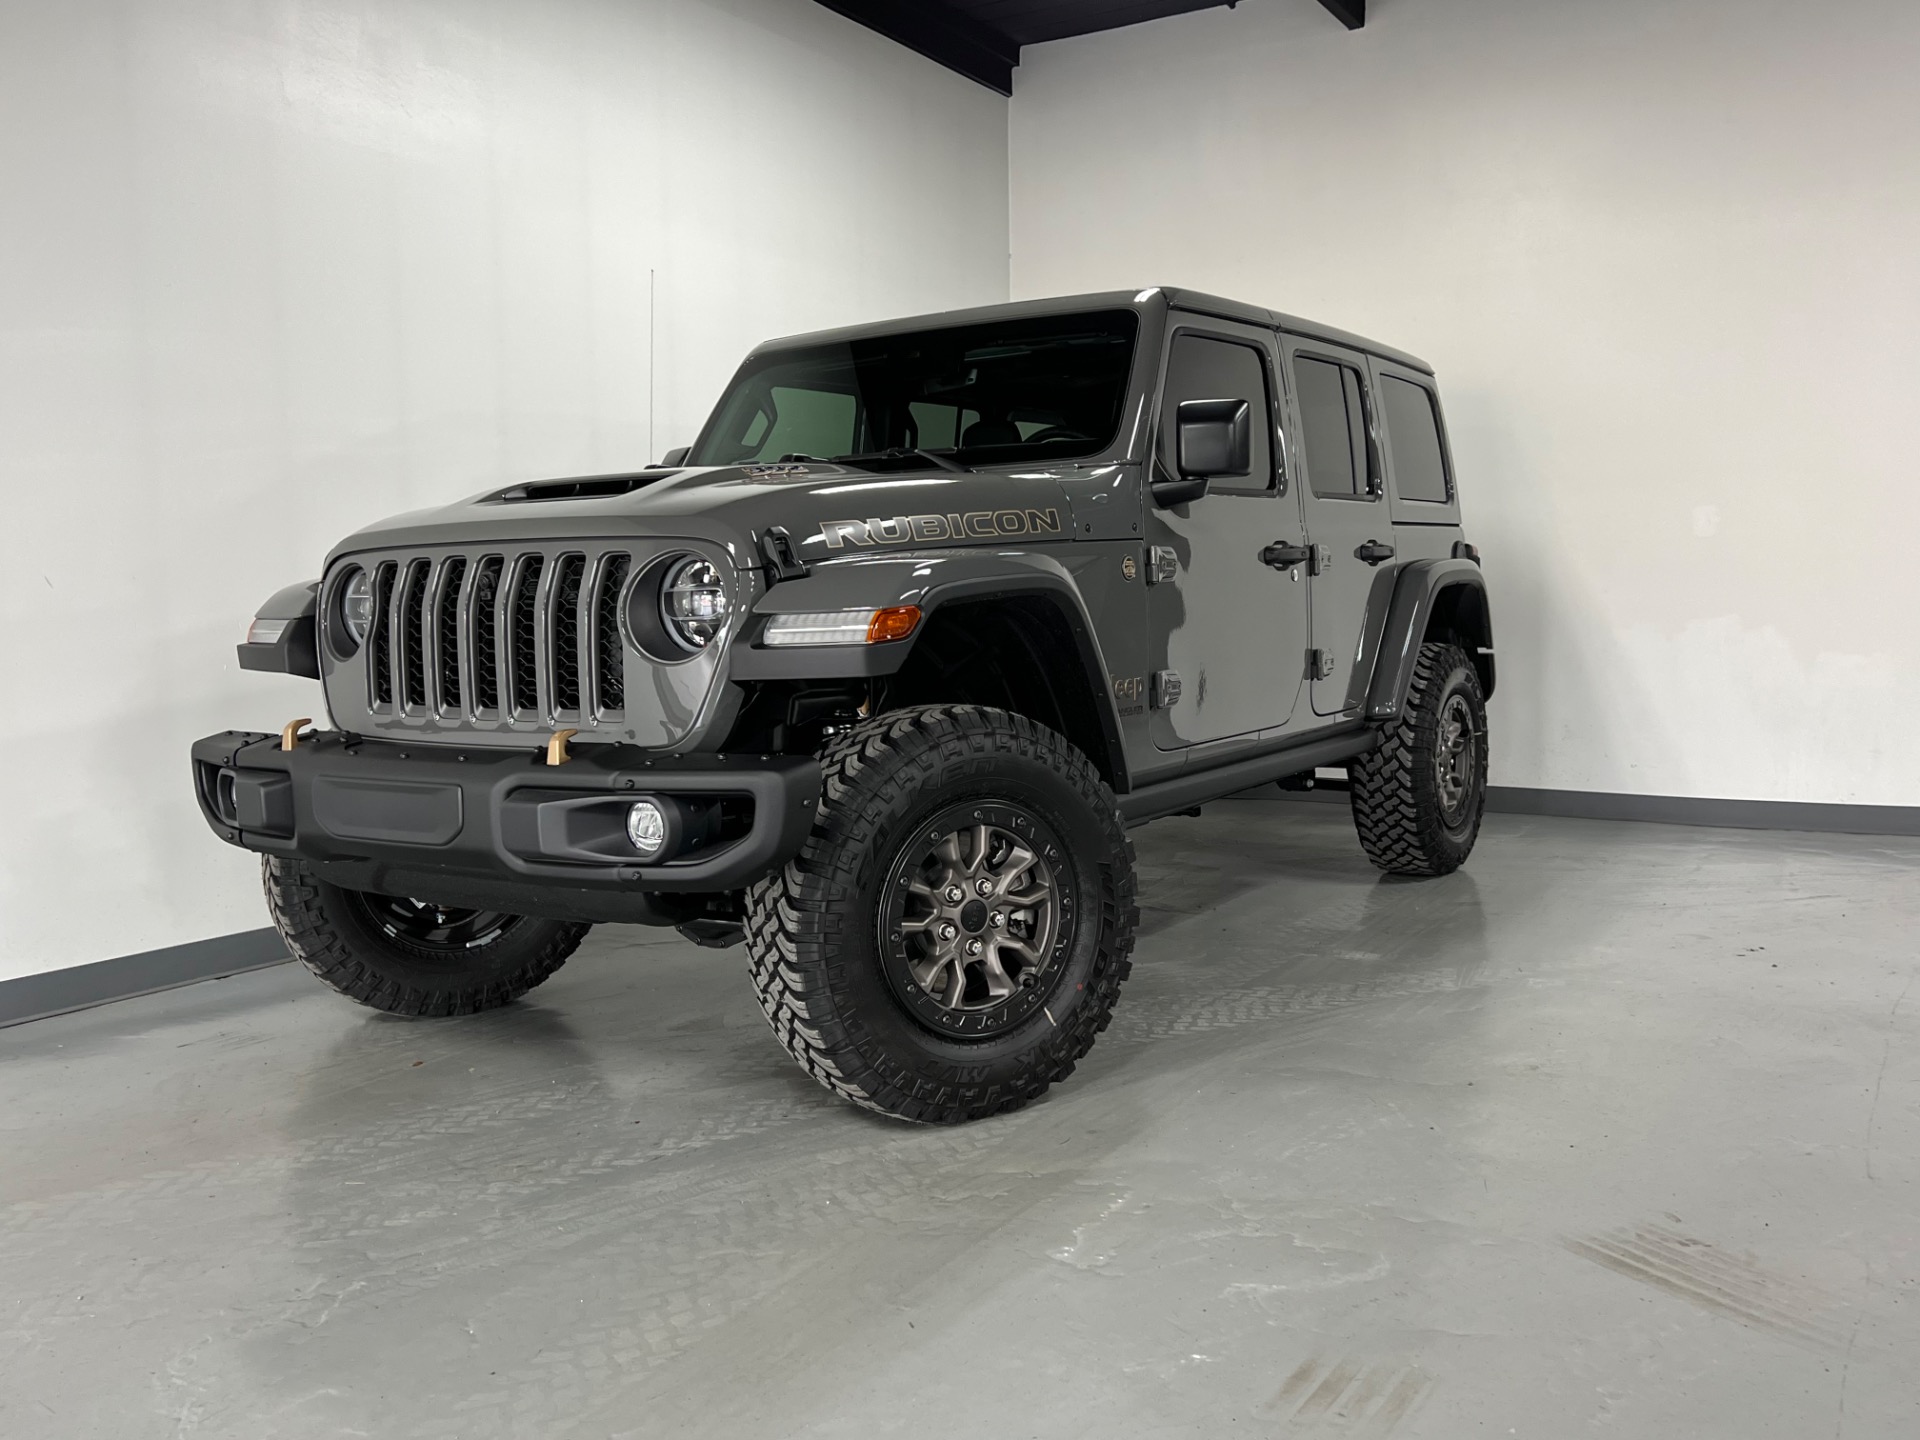 Used 2022 Sting-Gray Clear Coat Jeep Wrangler Unlimited RUBICON 392 4X4 470- hp v8 Rubicon 392 For Sale (Sold) | Prime Motorz Stock #3805